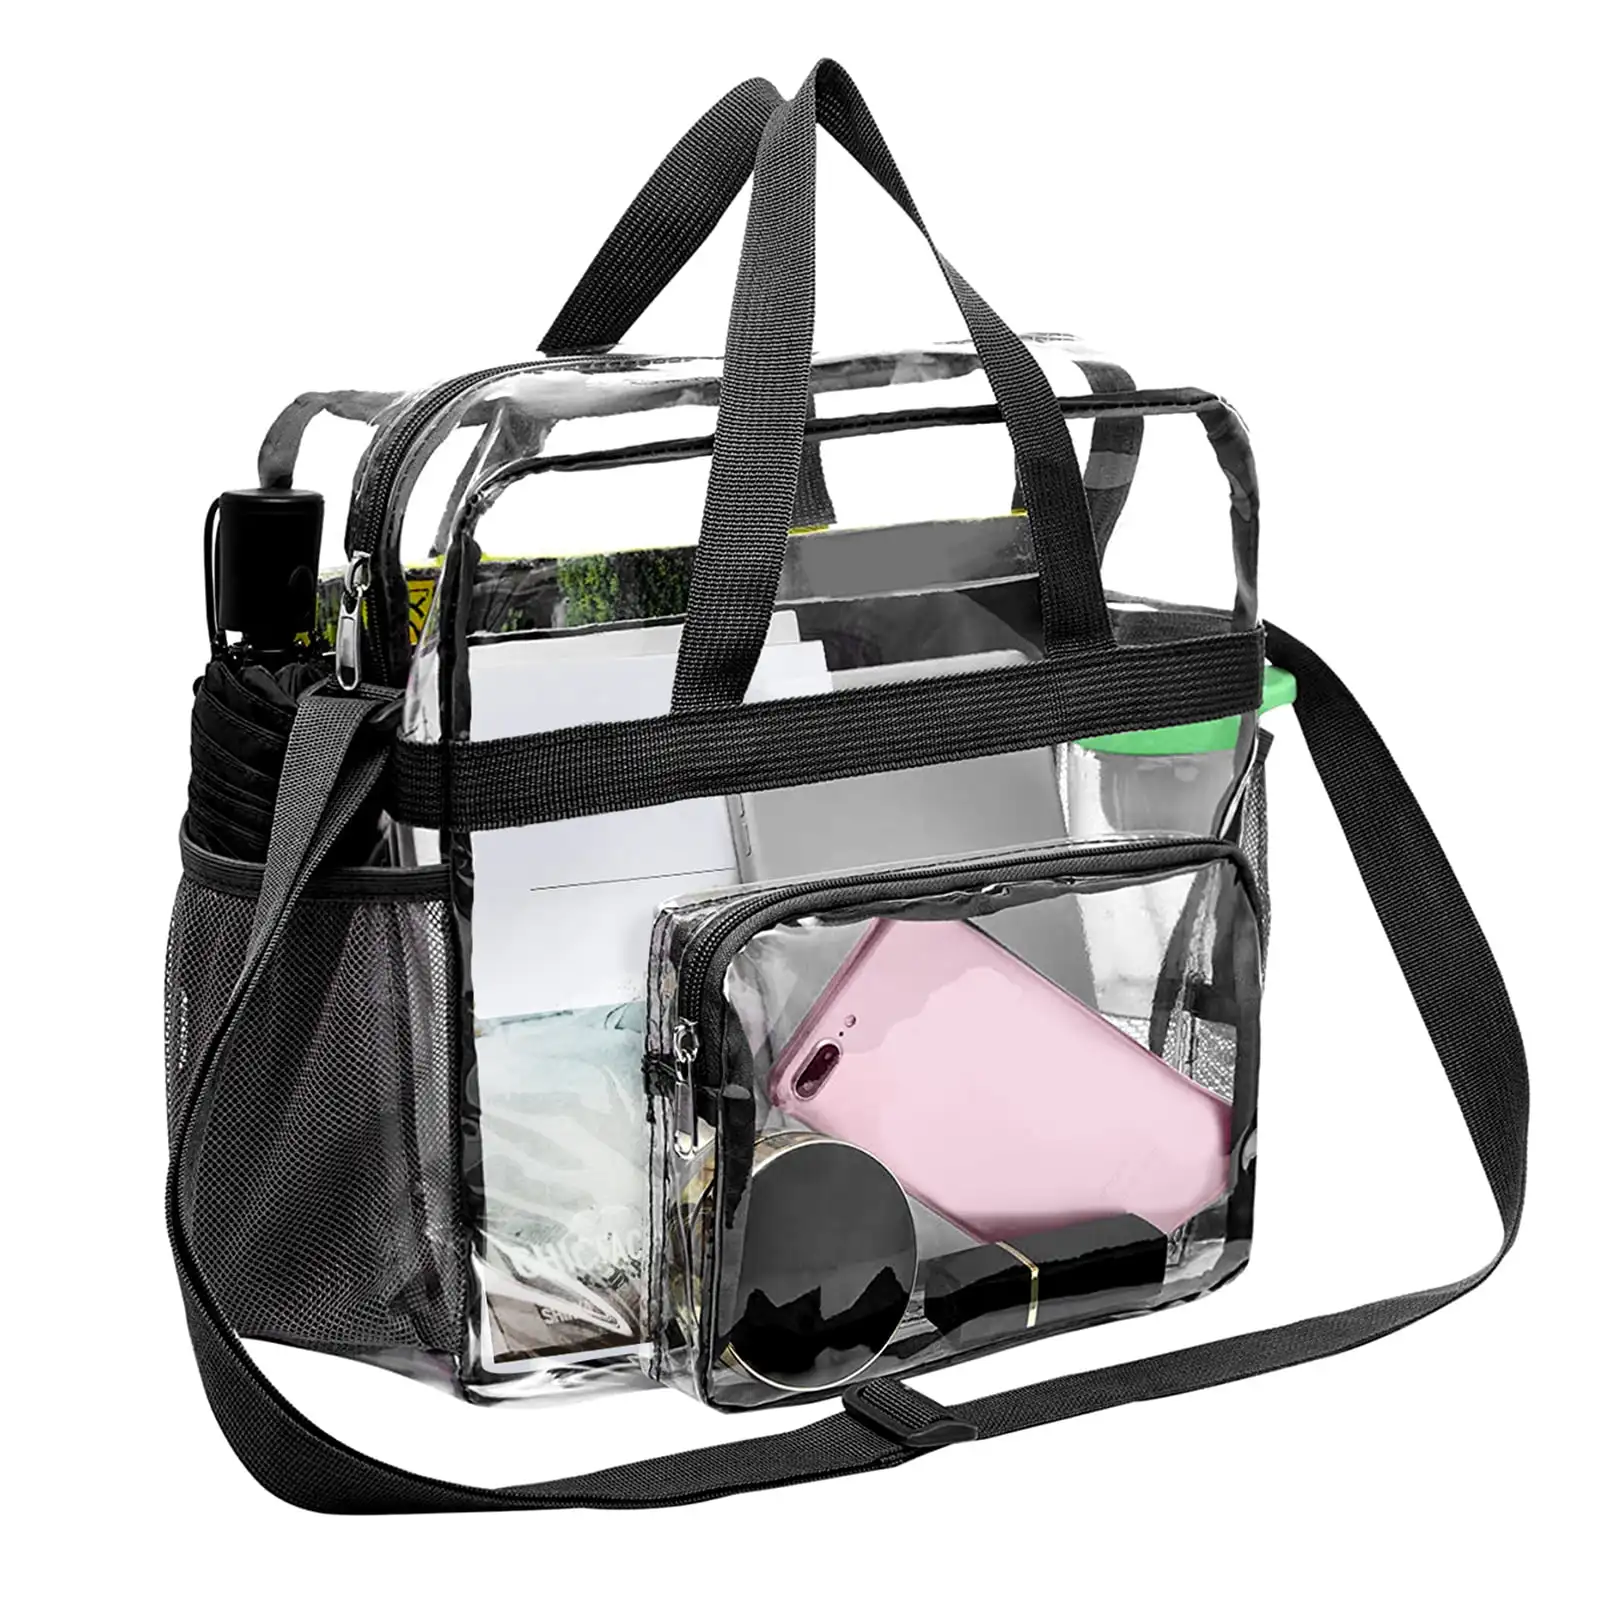 Clear Tote Bag, Clear Bag for Stadium, Clear Plastic Crossbody Bag with Adjustable Strap, Waterproof Messenger Handbag, Travel a